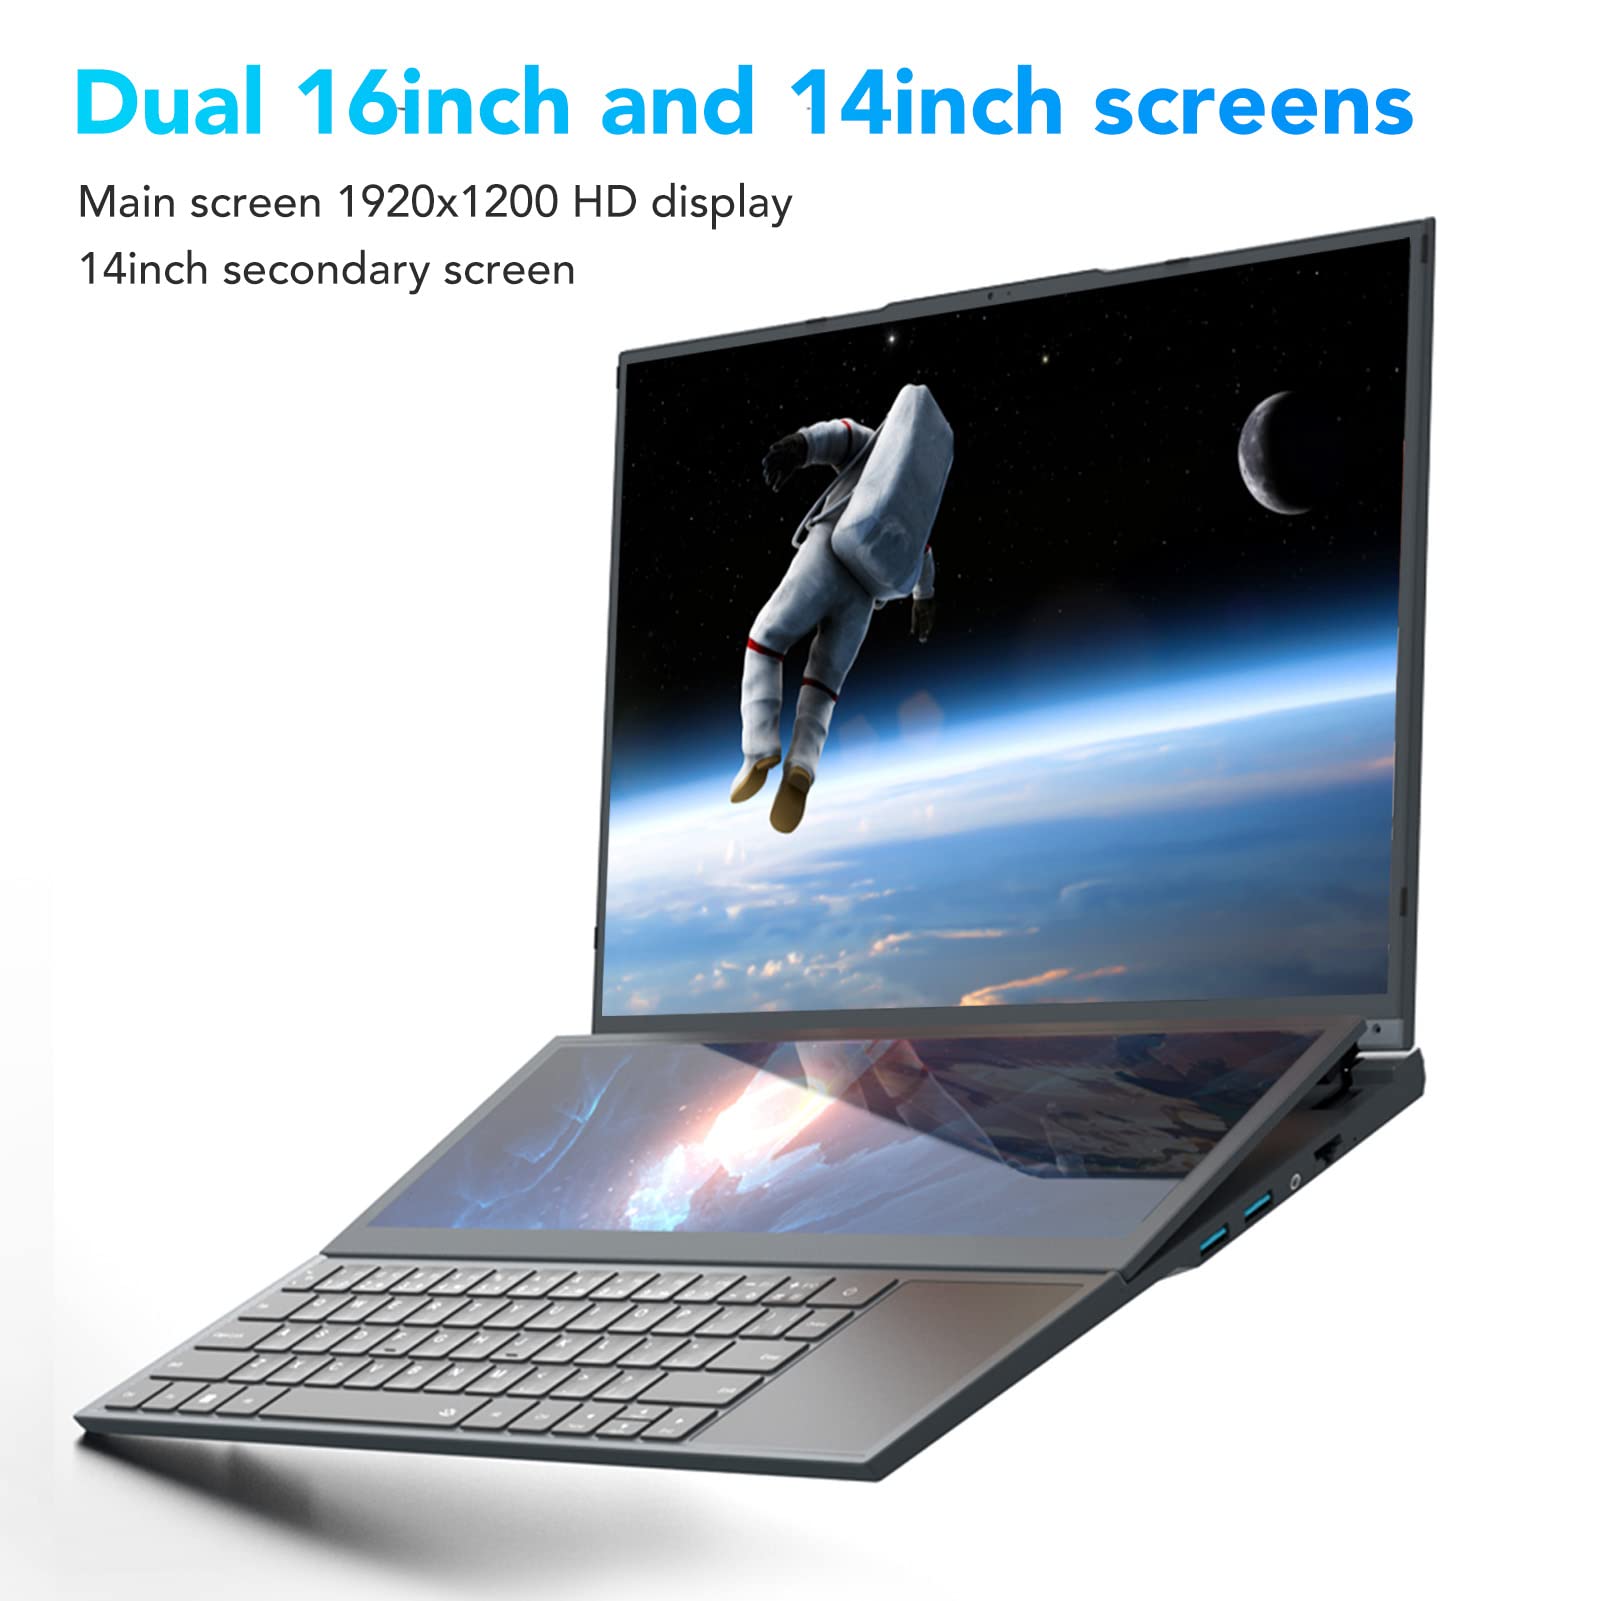 GOWENIC 16in 14in Dual Screen Laptop, 16in 1920x1200 HD Main Screen and 14in FHD Touch Sub Screen, 32 GB RAM, 512 GB SSD, 10th Generation for Intel Processors for Windows 10 11